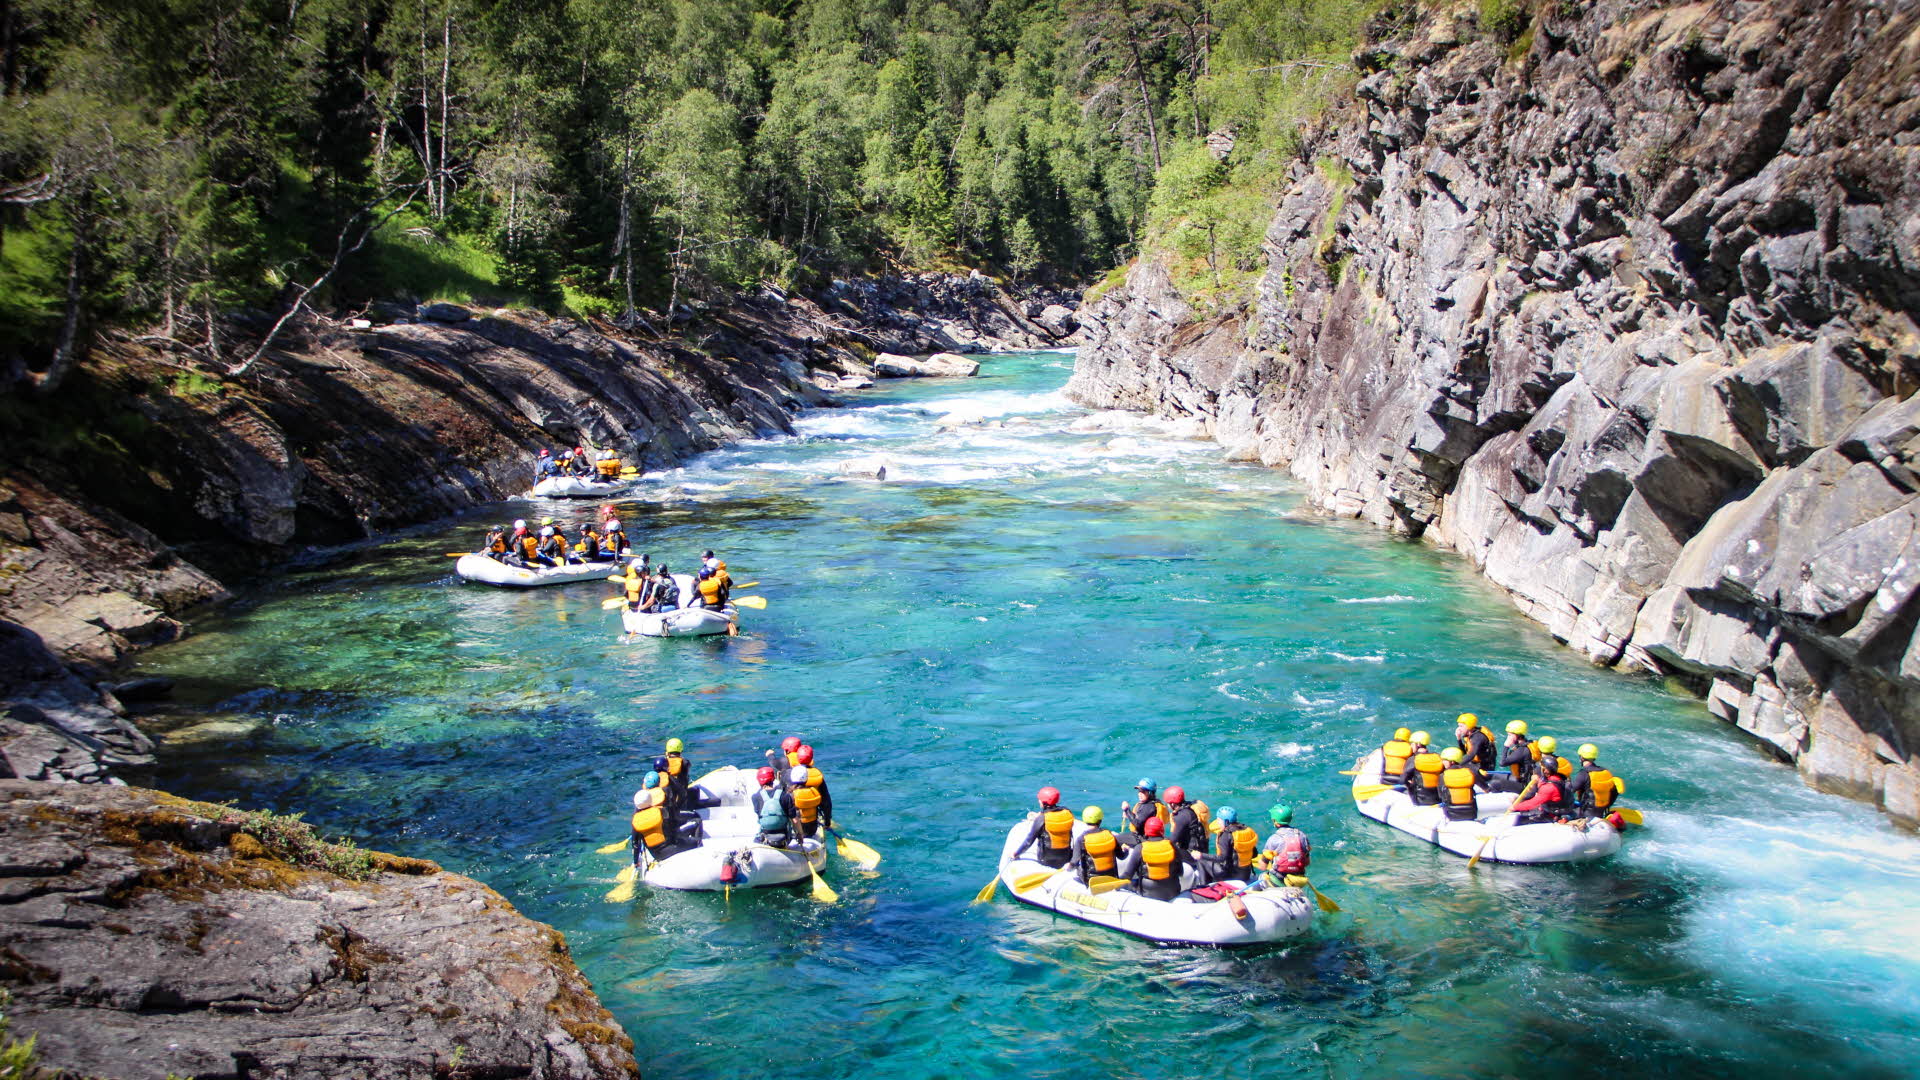 Six rafts full of people in life jackets on a clear river in a canyon.